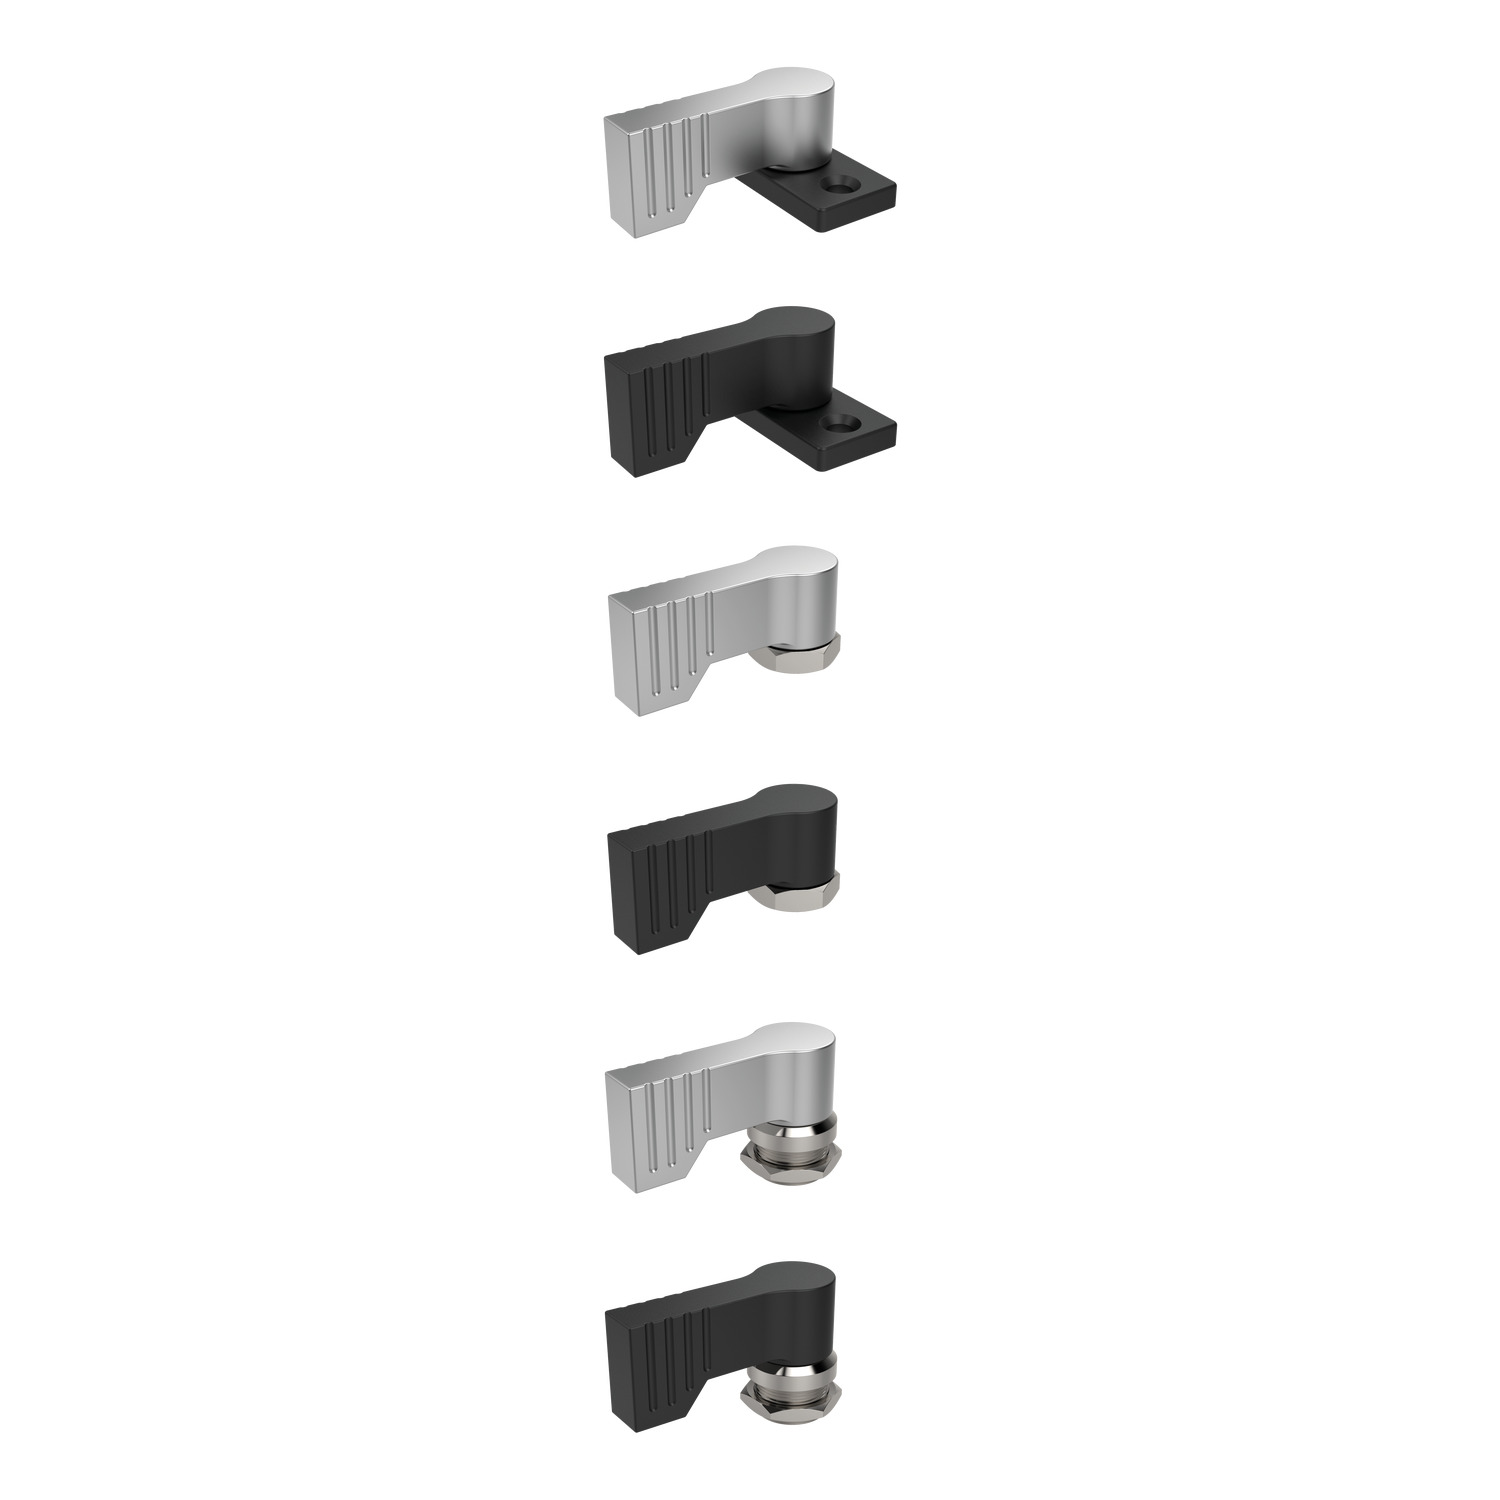 73906.W0202 Retaining Catches - Die cast zinc. Black - Mounting Plate - 17